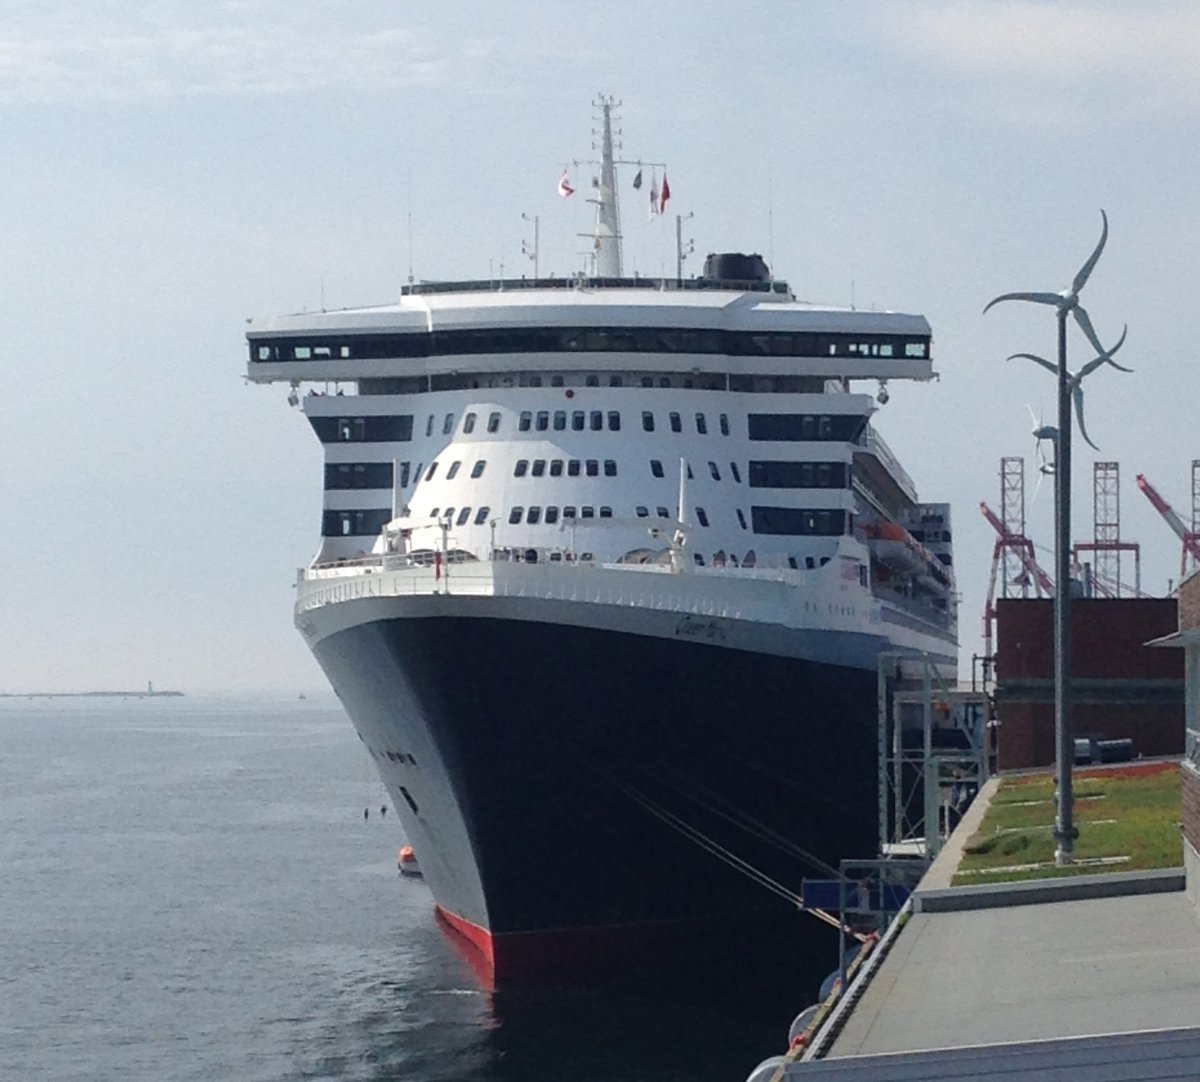 File: Queen Mary 2 docked in Halifax.